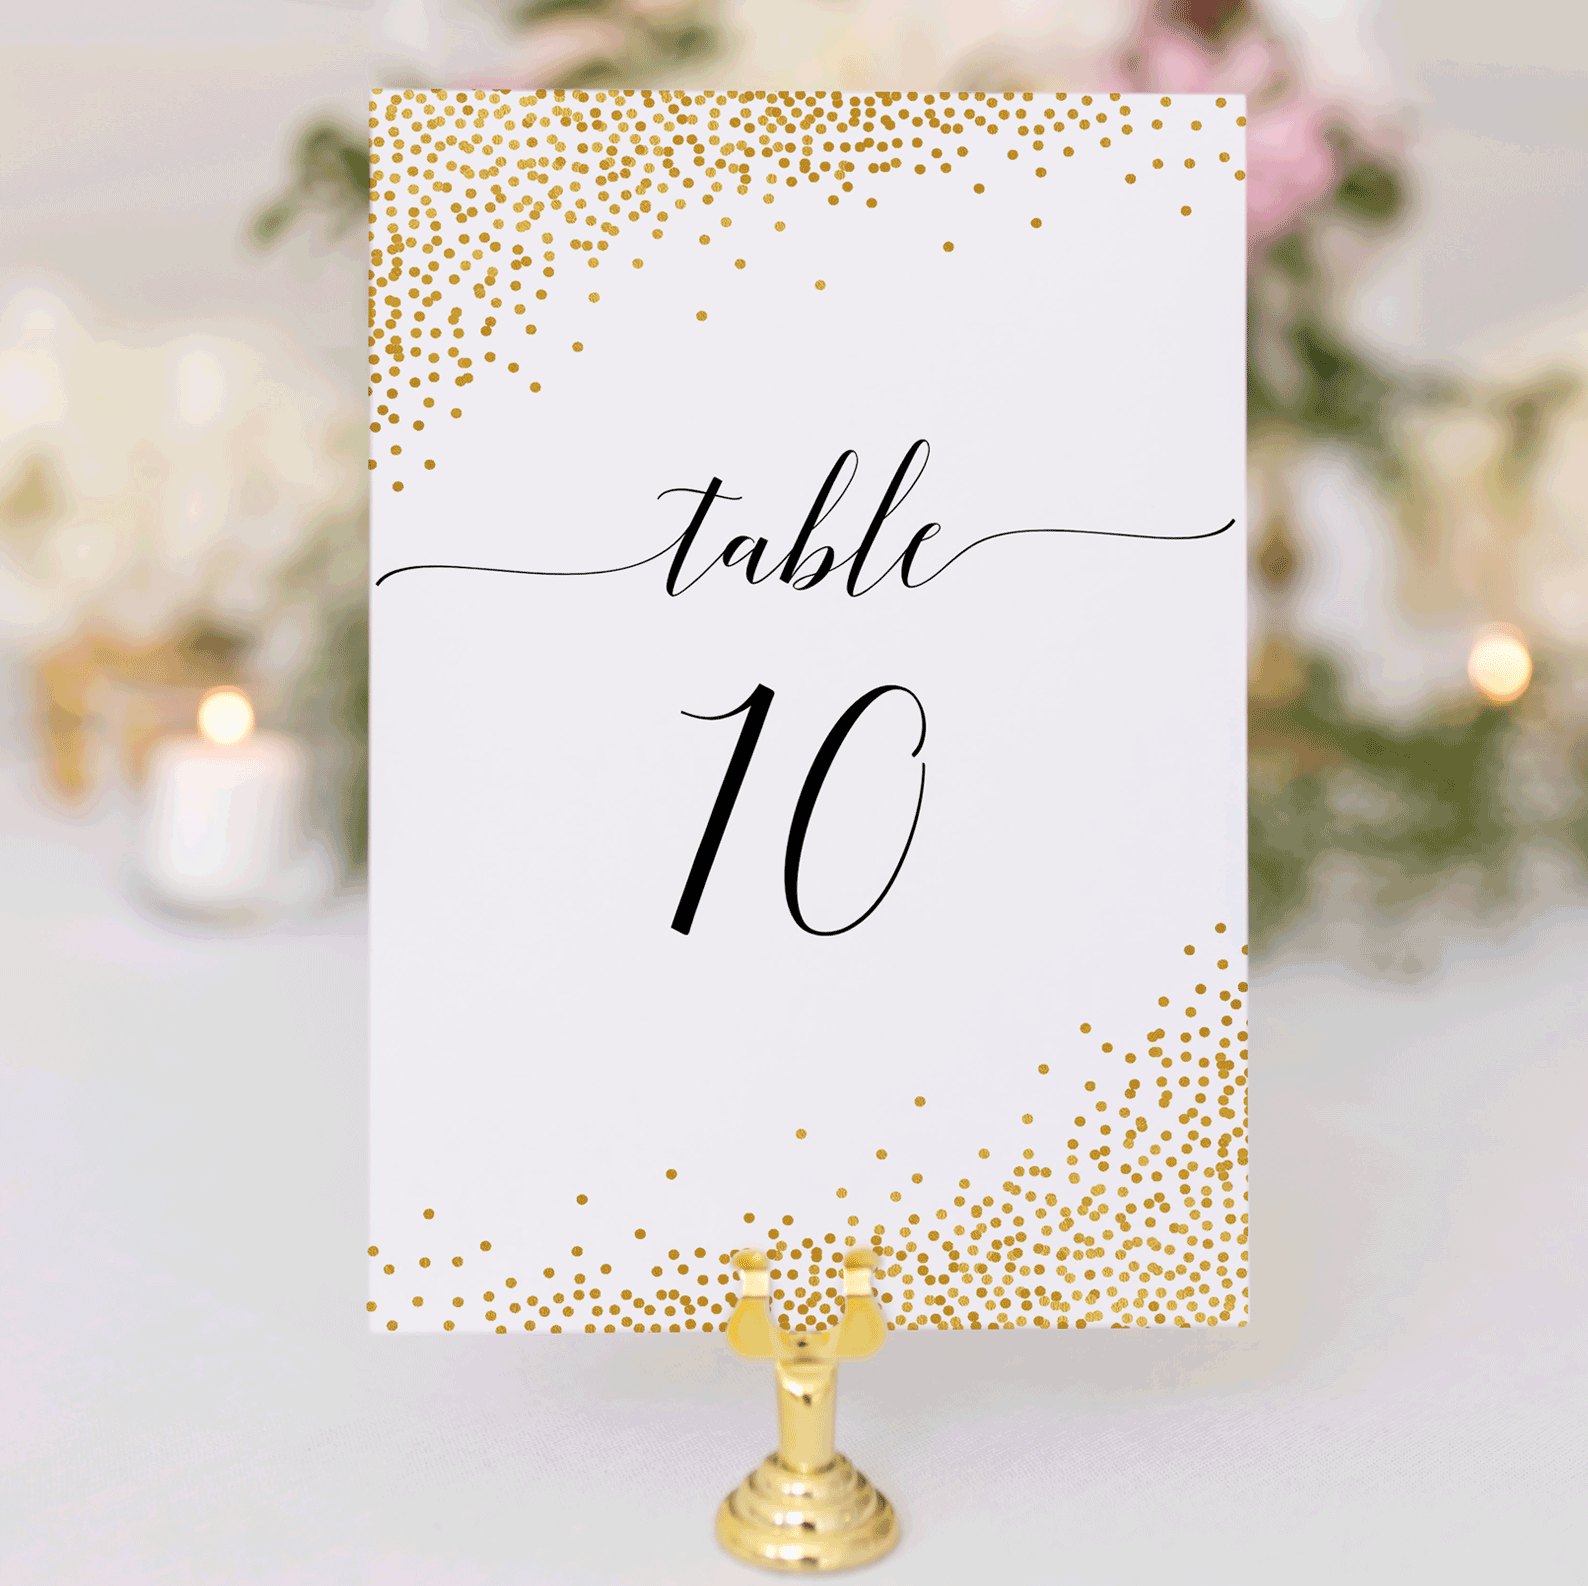 Wedding Table Number Cards Confetti Gold 1 40 Instant Downloads Wedding Template Shop